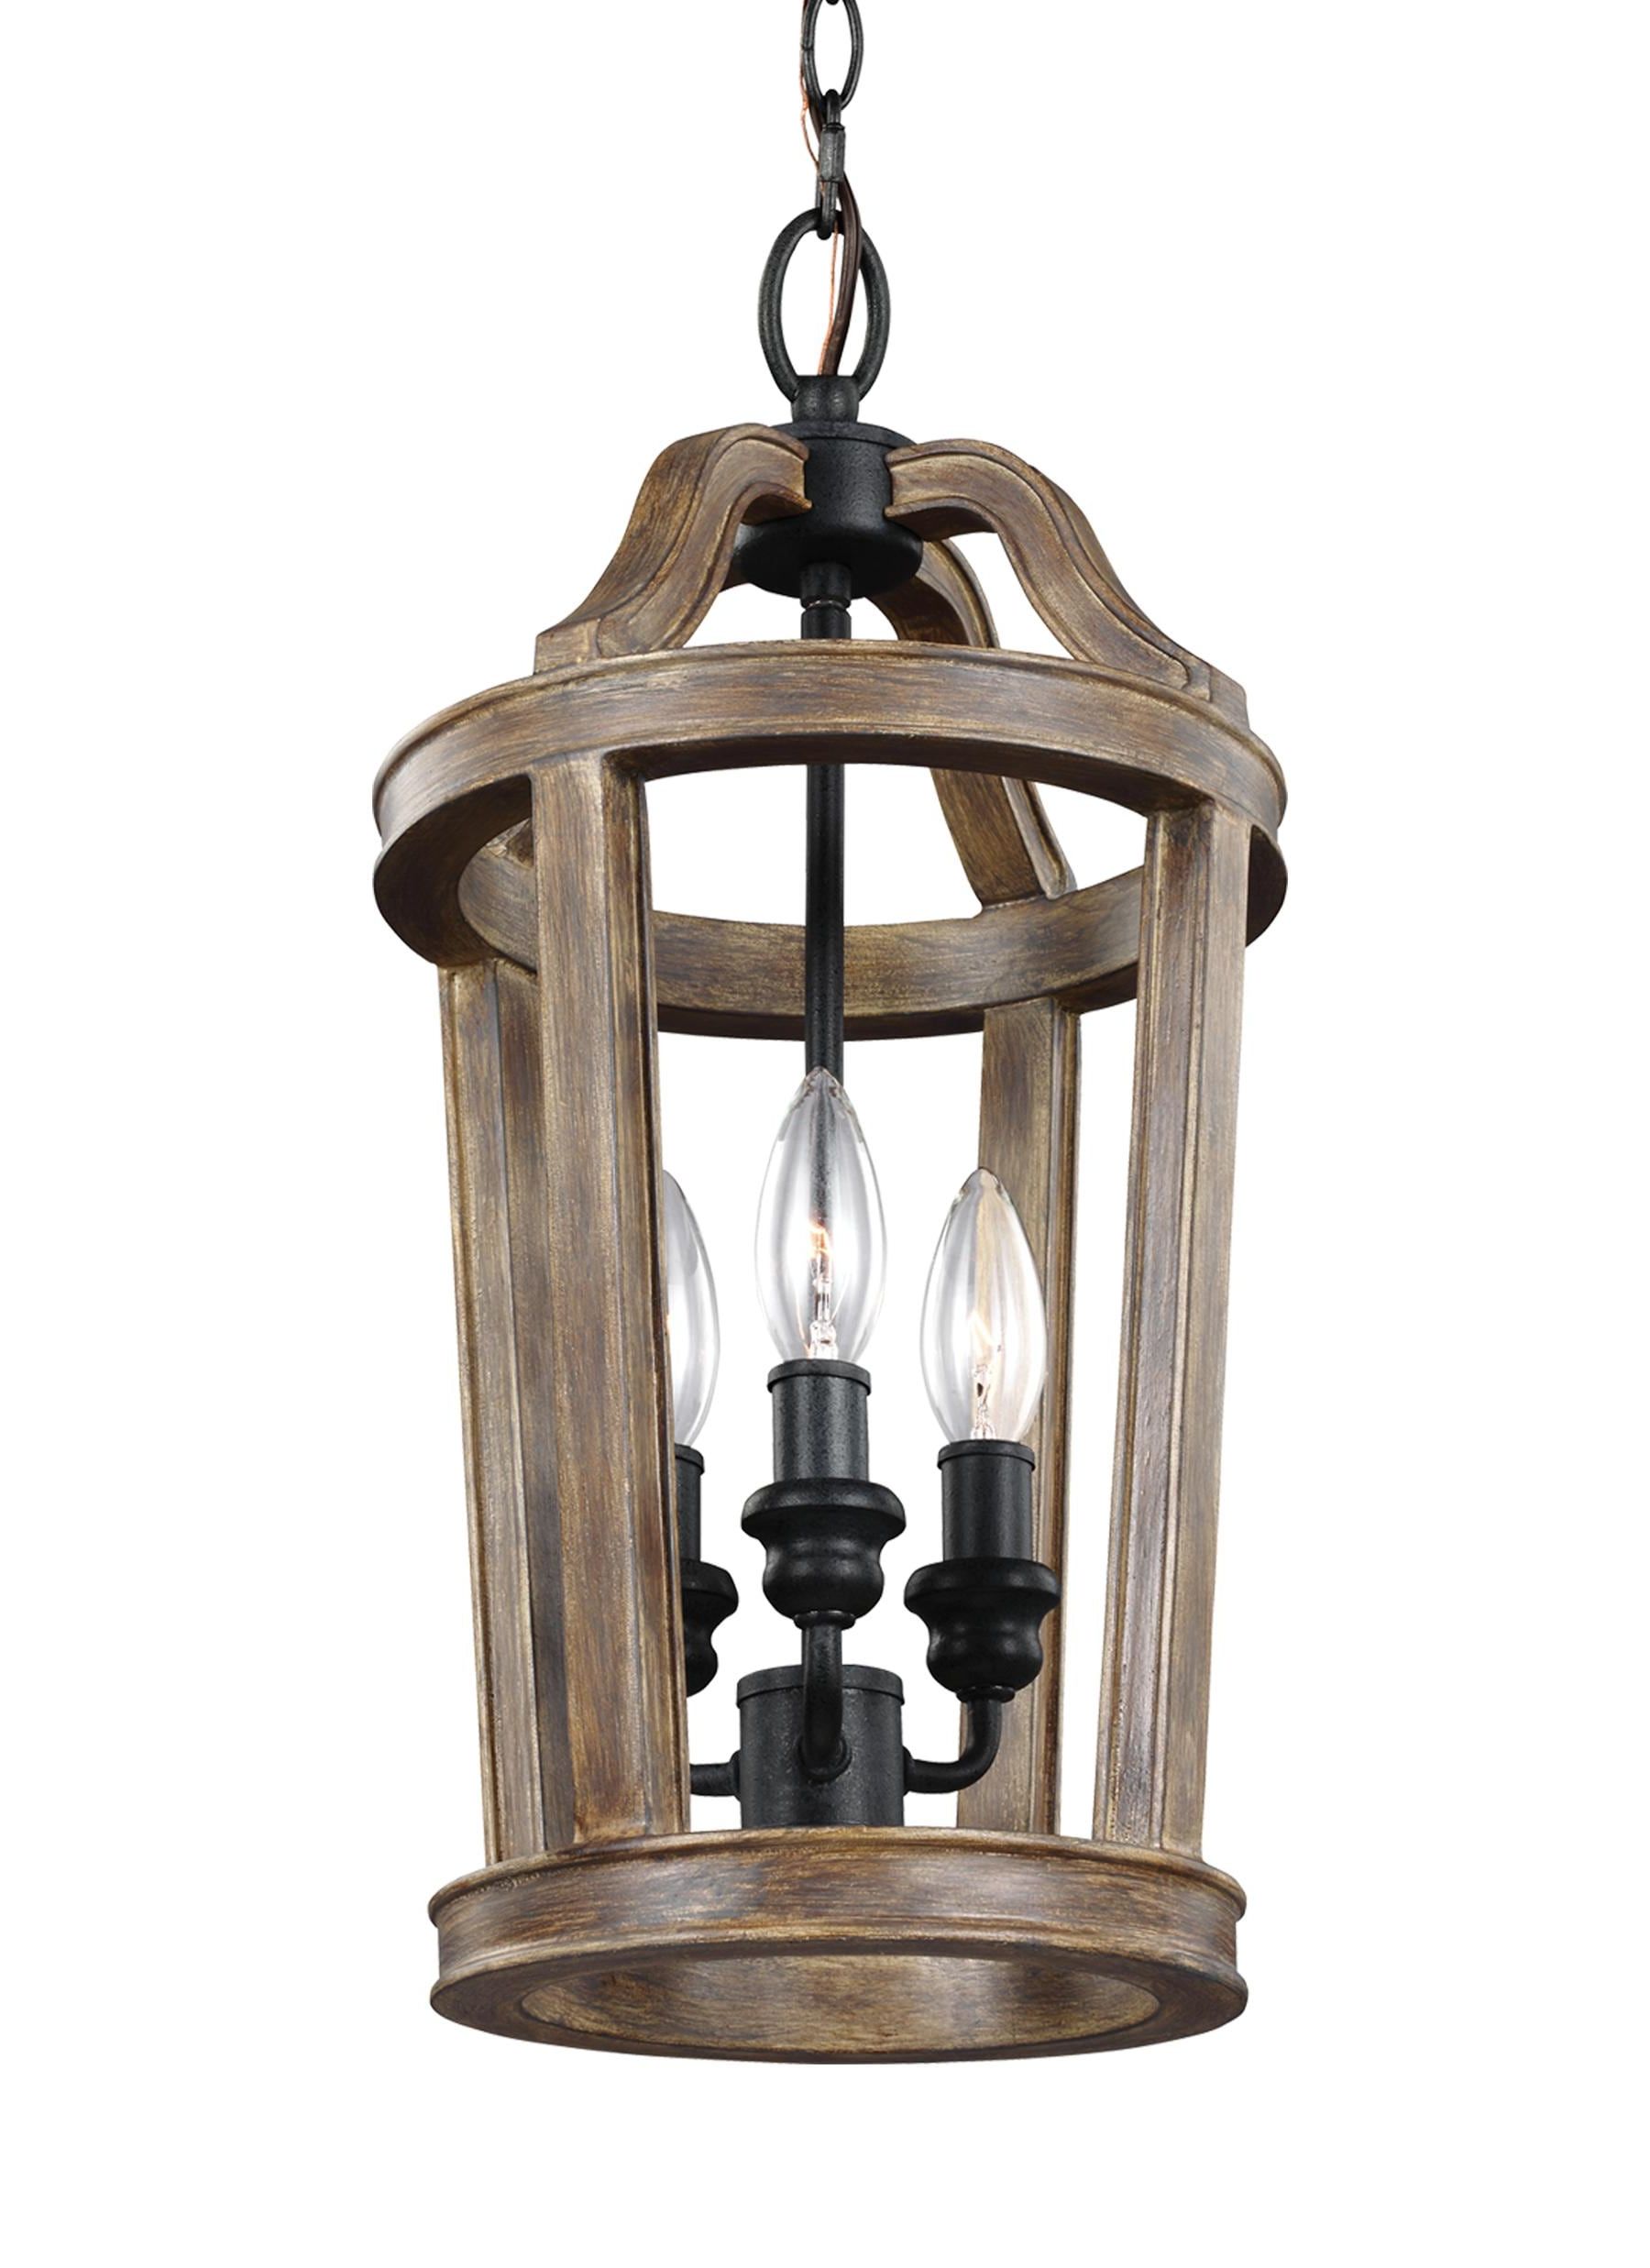 Weathered Oak Wood Lantern Chandeliers Intended For Most Up To Date Feiss Lorenz 3 Light Weathered Oak Wood Transitional Lantern Pendant Light  In The Pendant Lighting Department At Lowes (View 5 of 15)